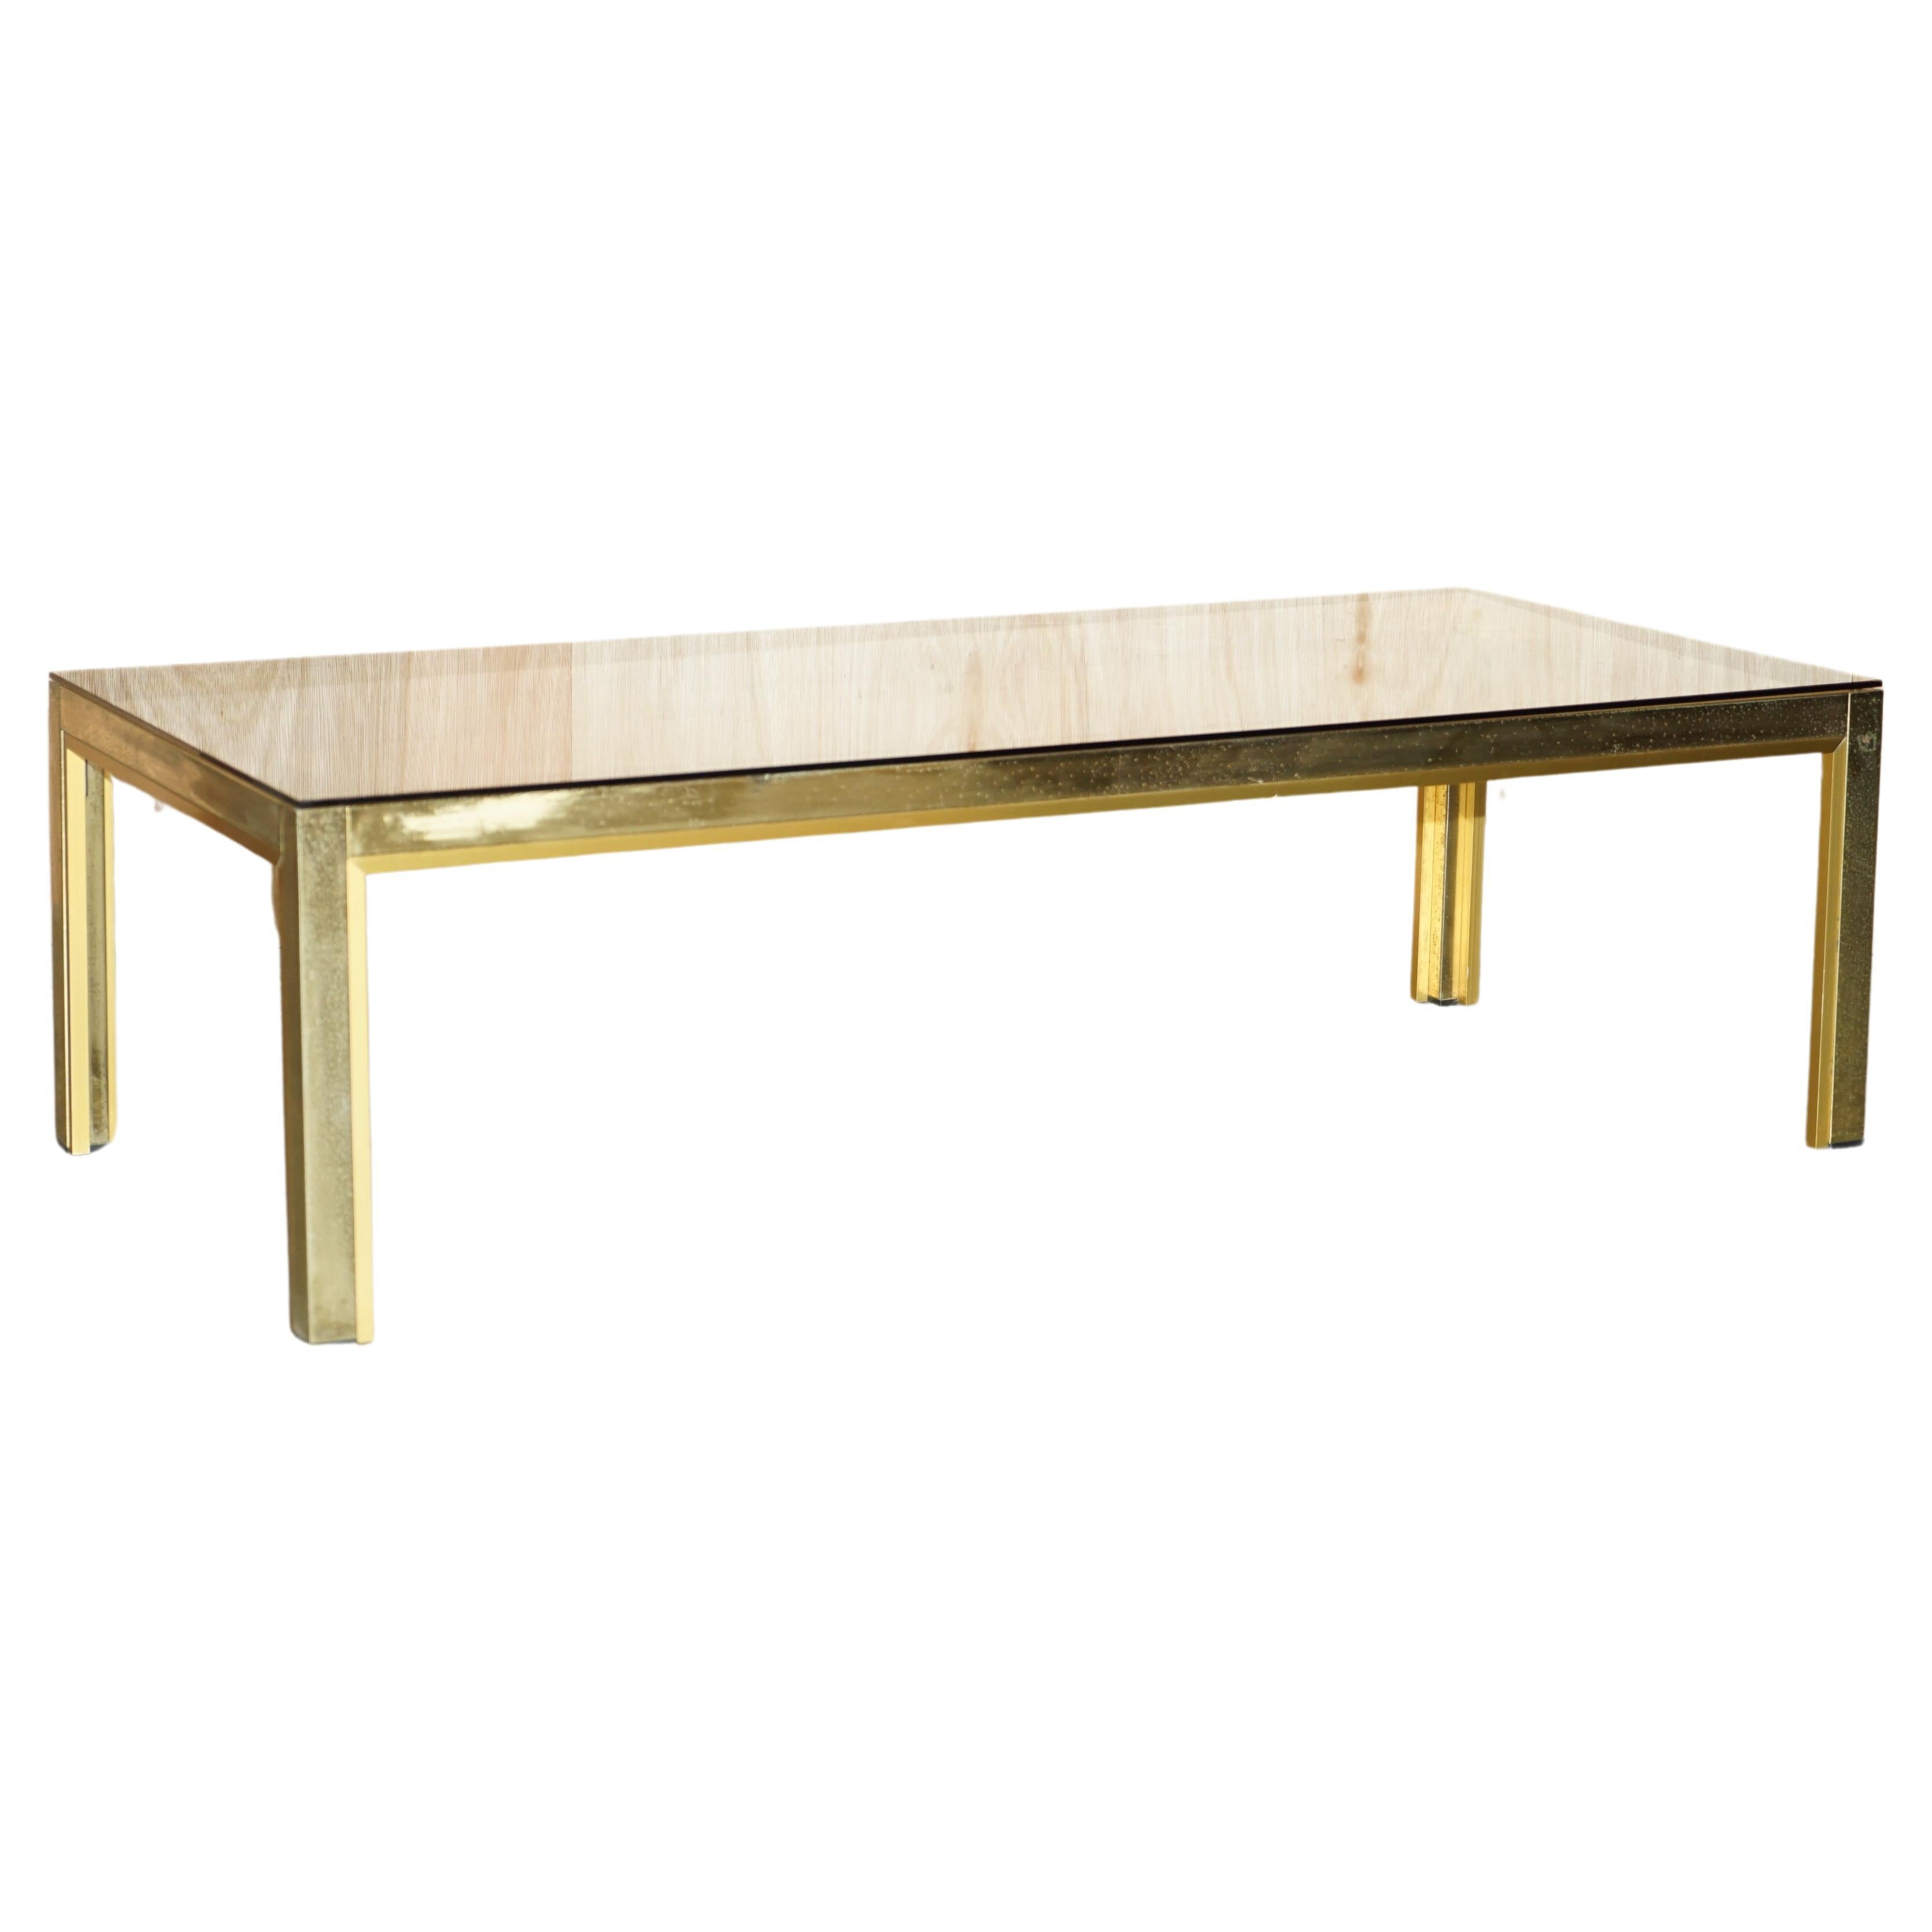 circa 1950's Mid-Century Modern Brass & Glass Coffee Cocktail Table Part Suite For Sale